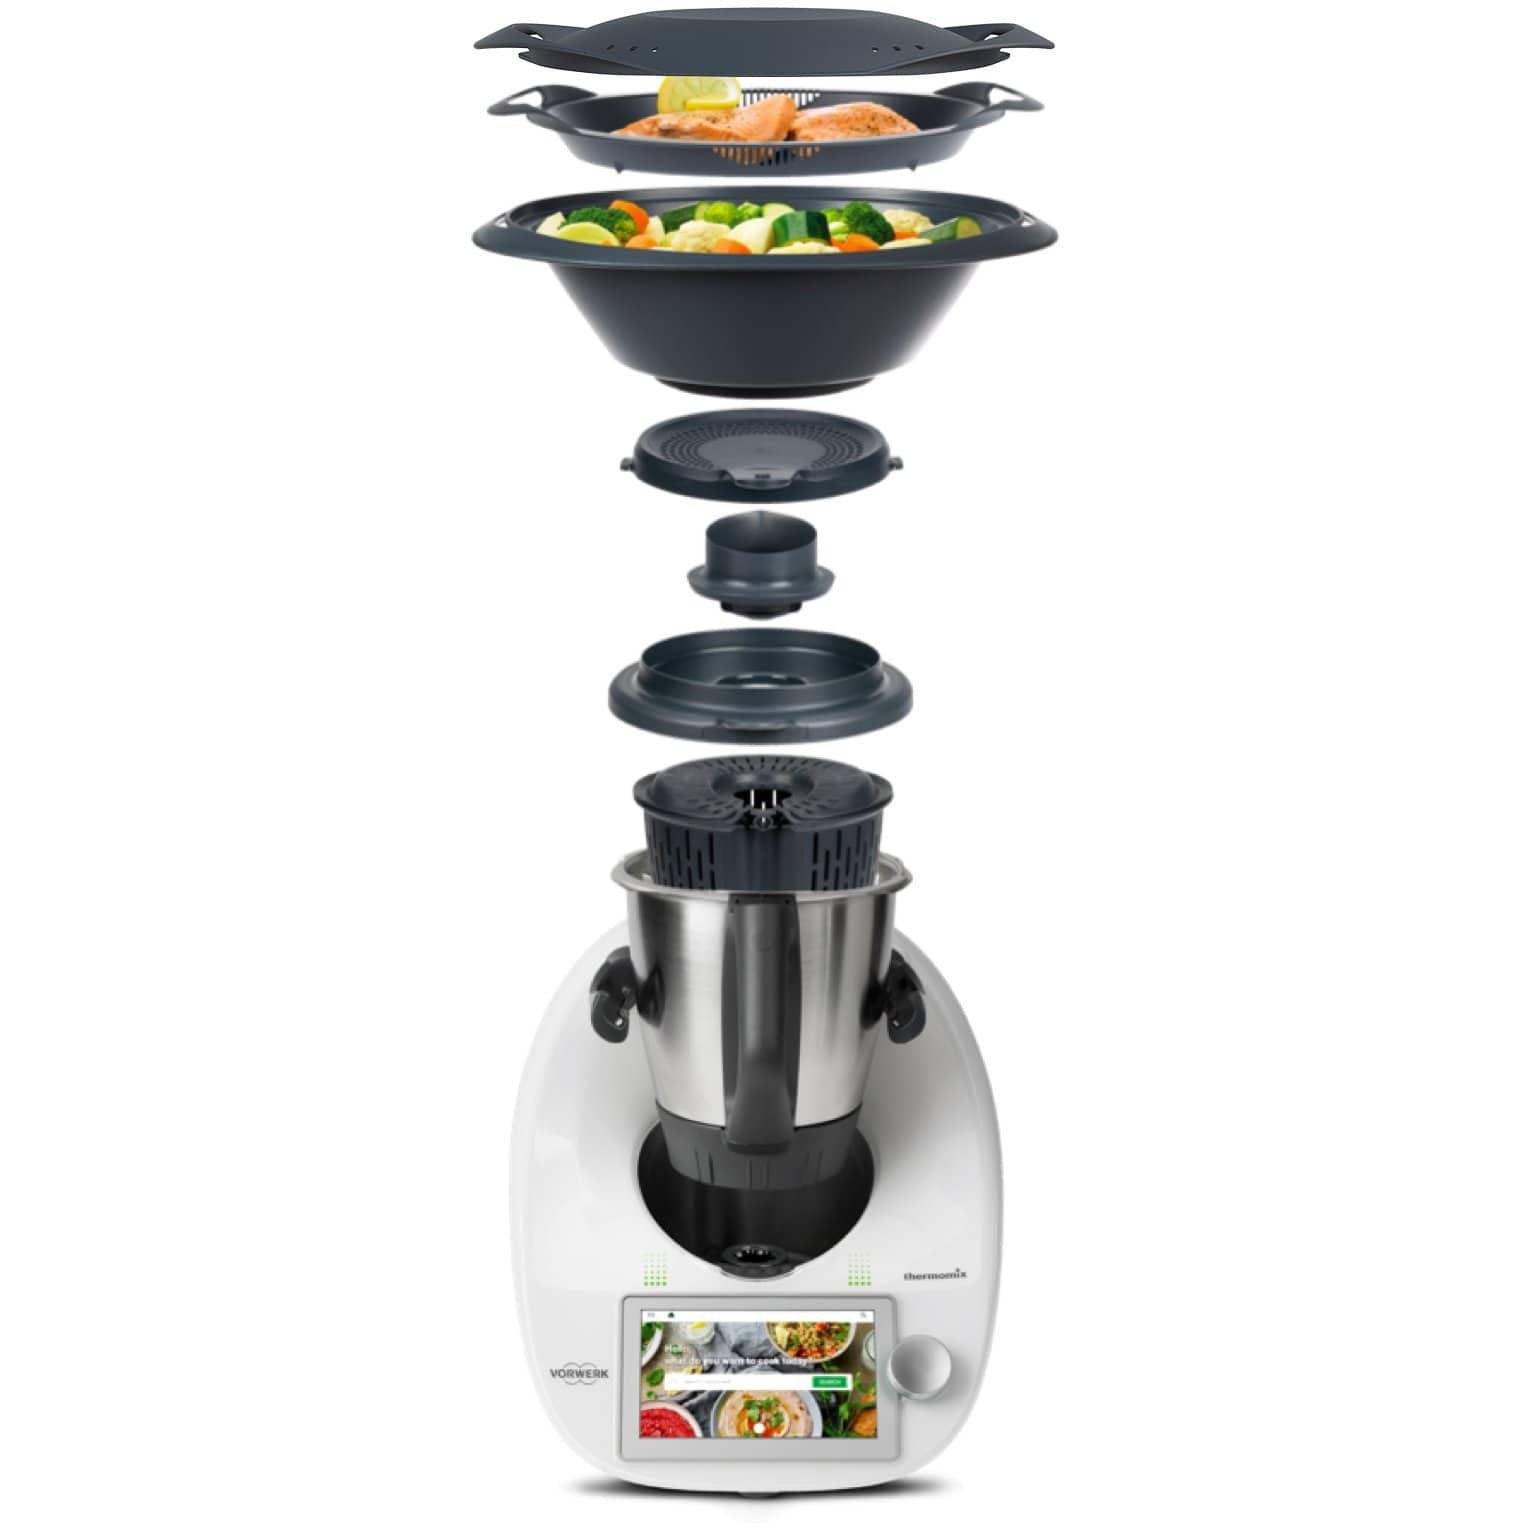 TM6 - All-In-One Cooking Appliance